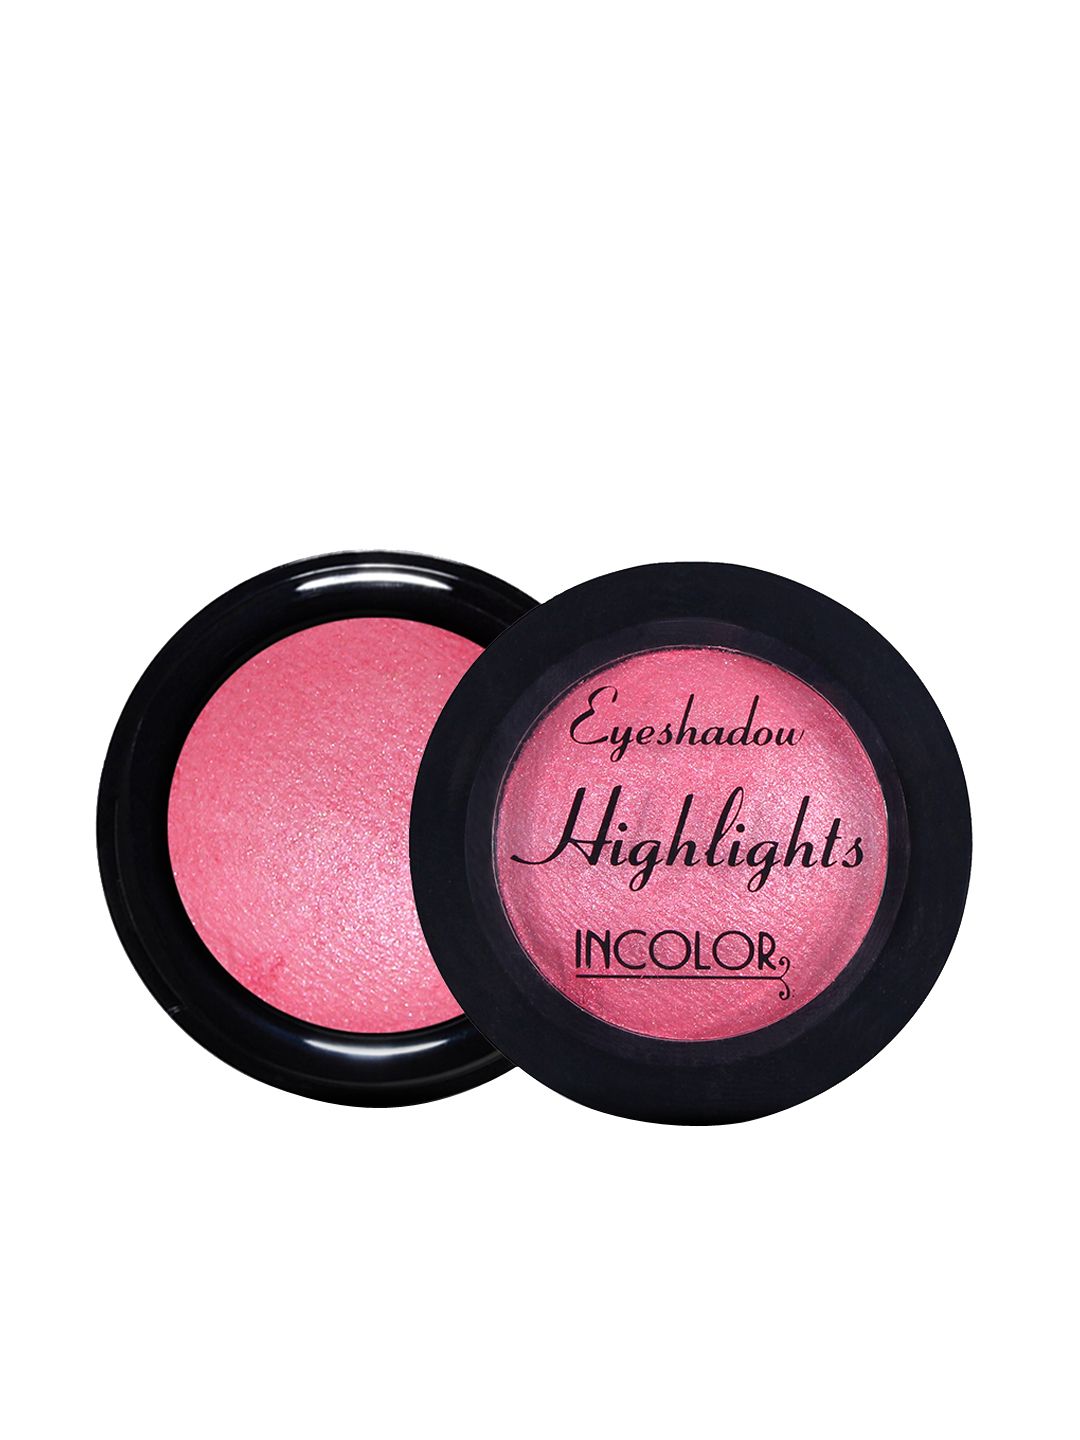 INCOLOR Highlighter Eyeshadow - 31 Price in India